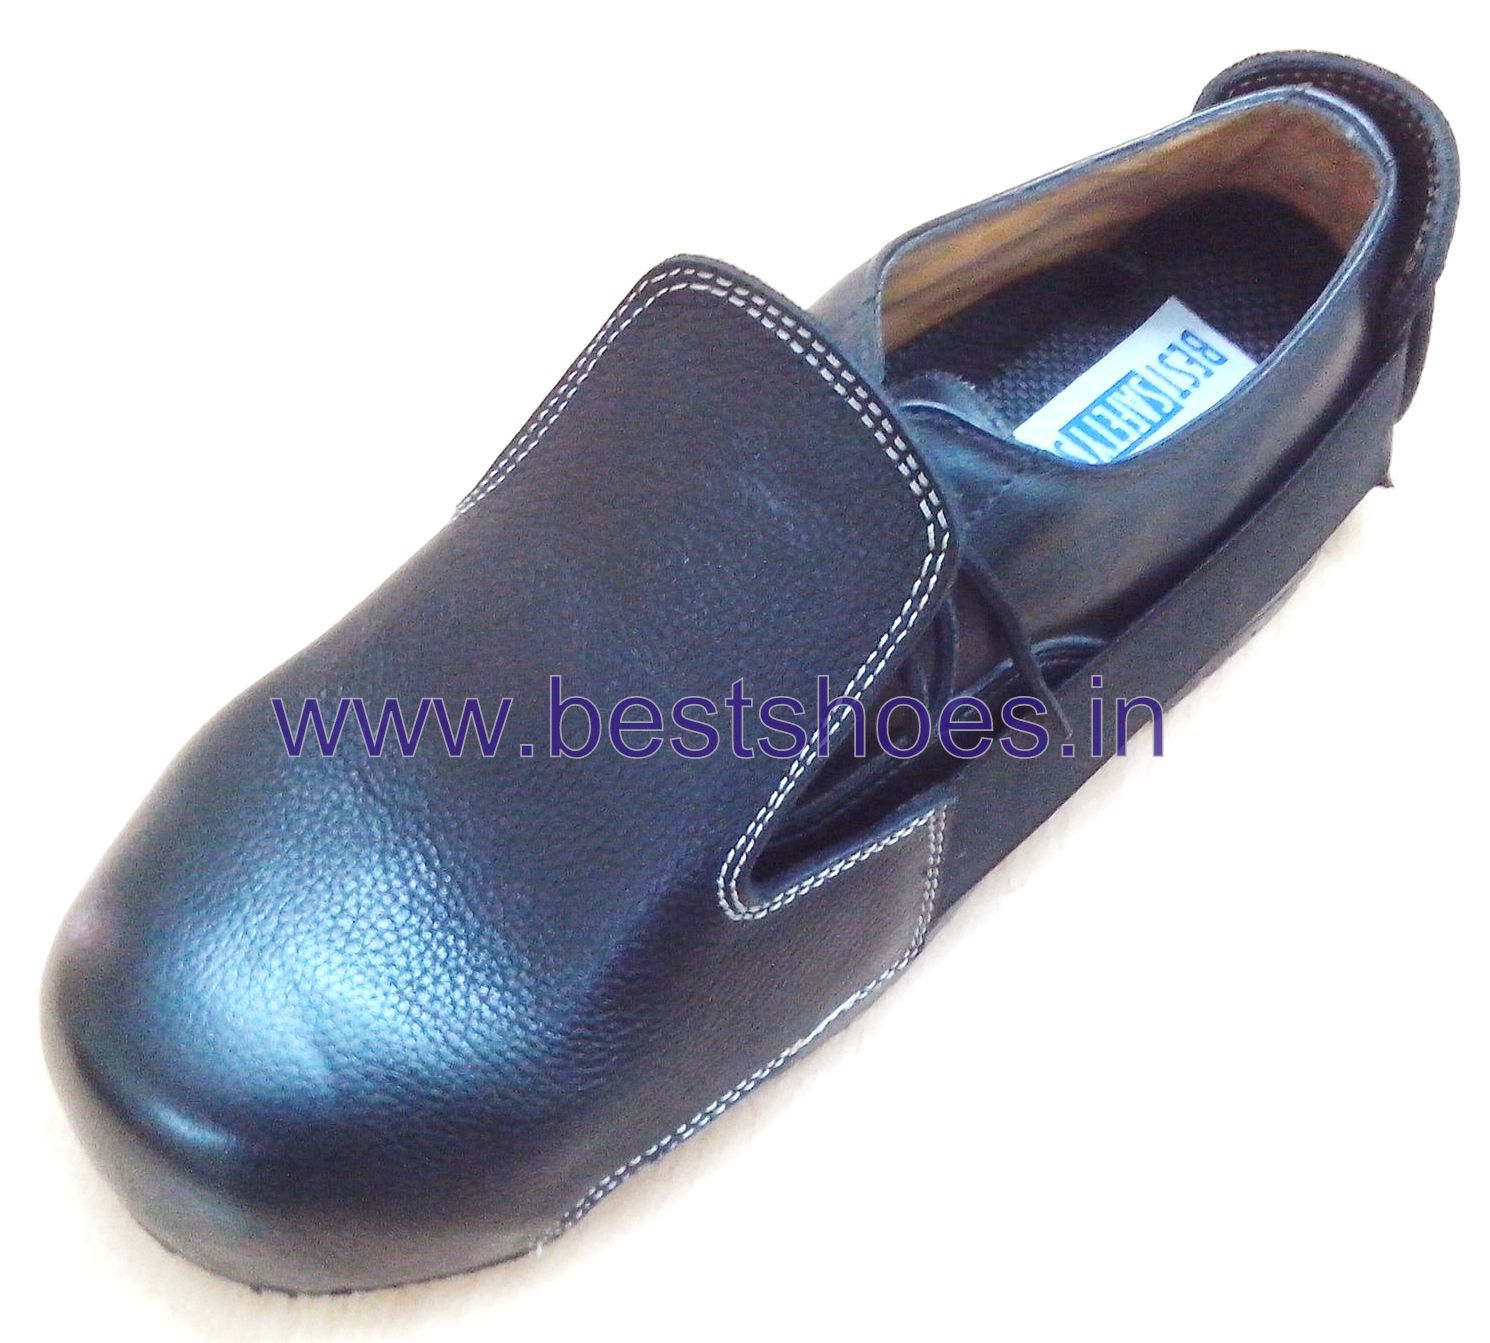 steel toe_shoe toe 13 001 Safety shoe cover cover shoes safety cover  with